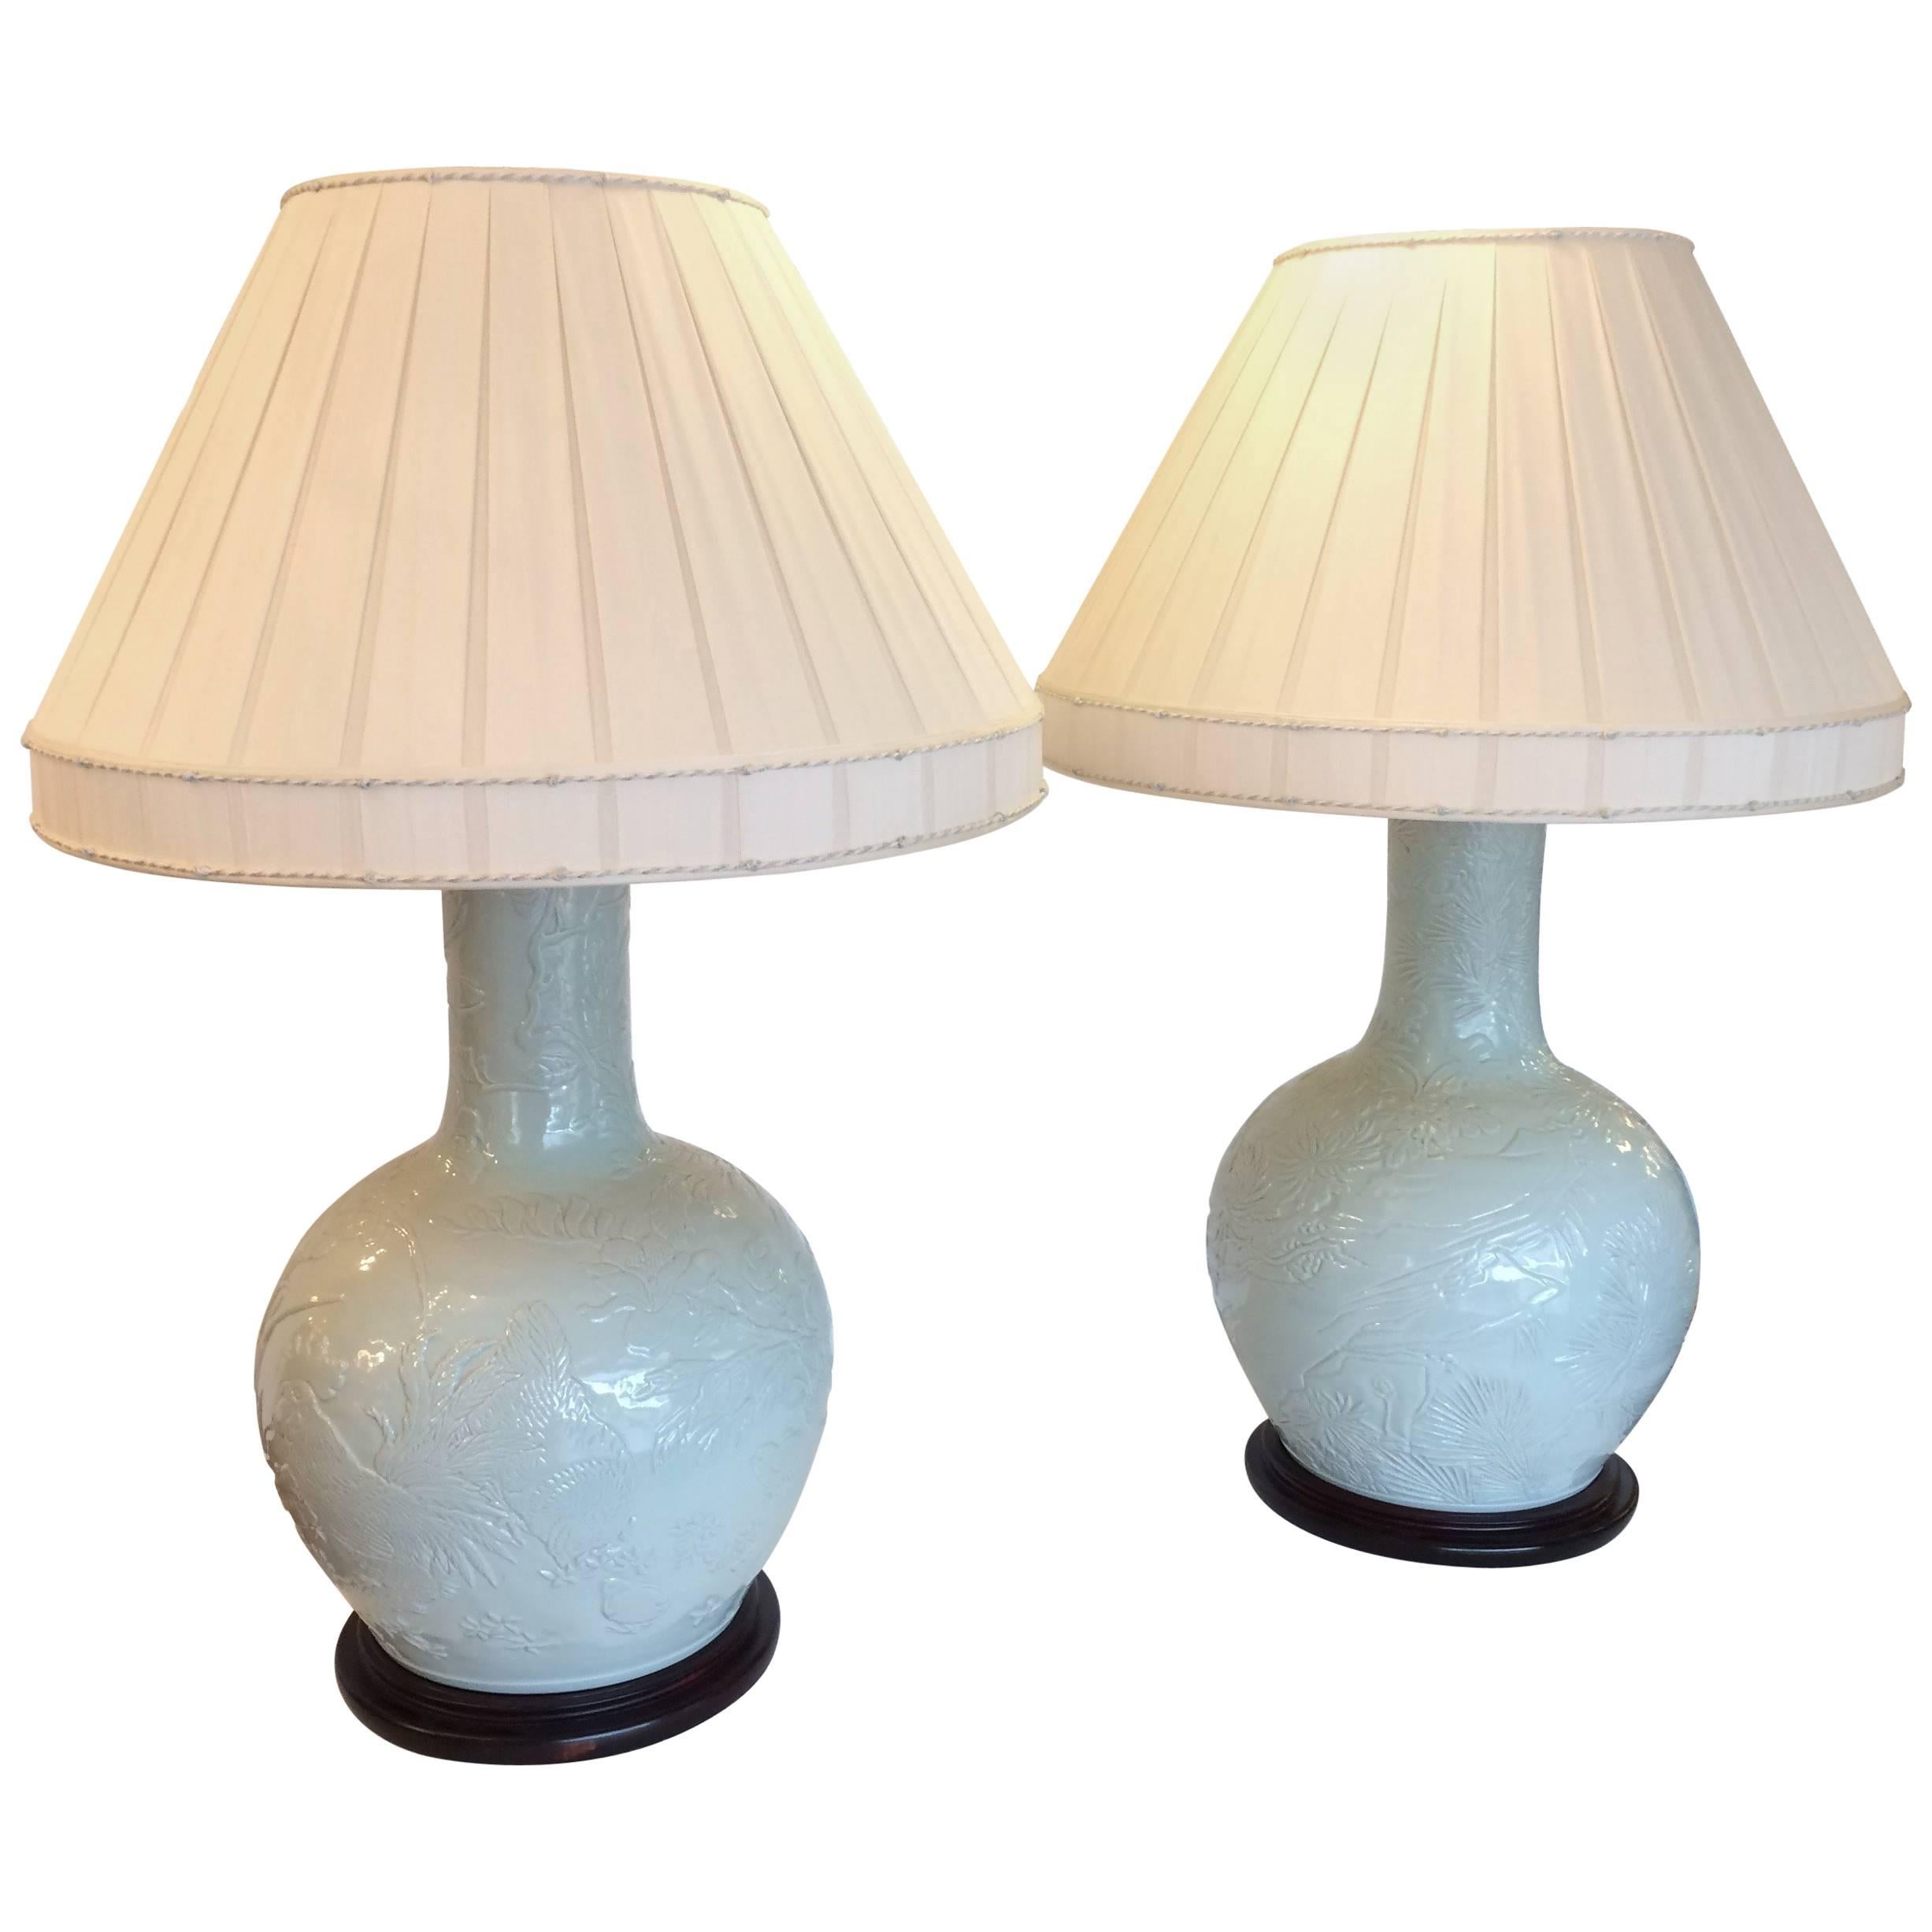 Monumentally Large Impressive Pair of Celadon Chinese Table Lamps